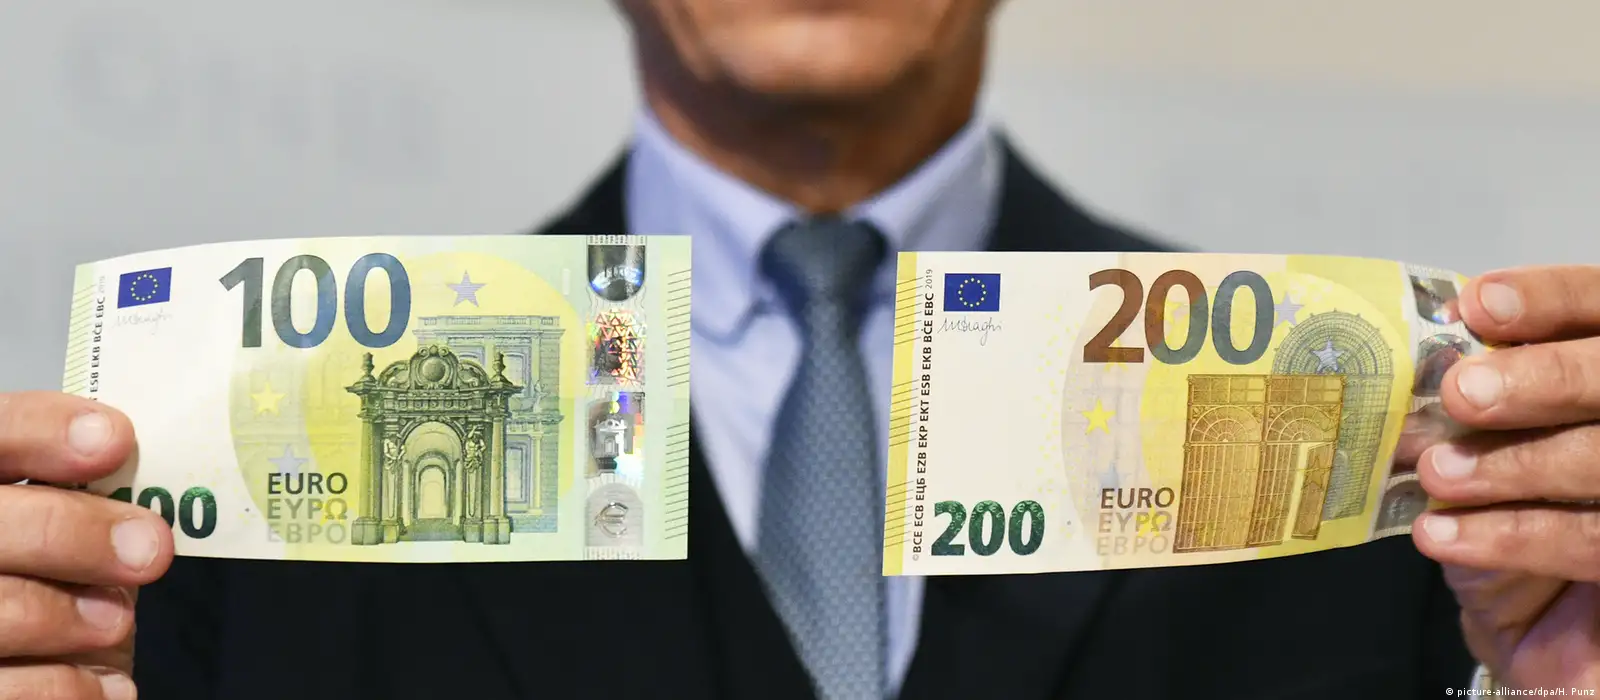 ECB unveils new €100 and €200 banknotes – DW – 09/17/2018